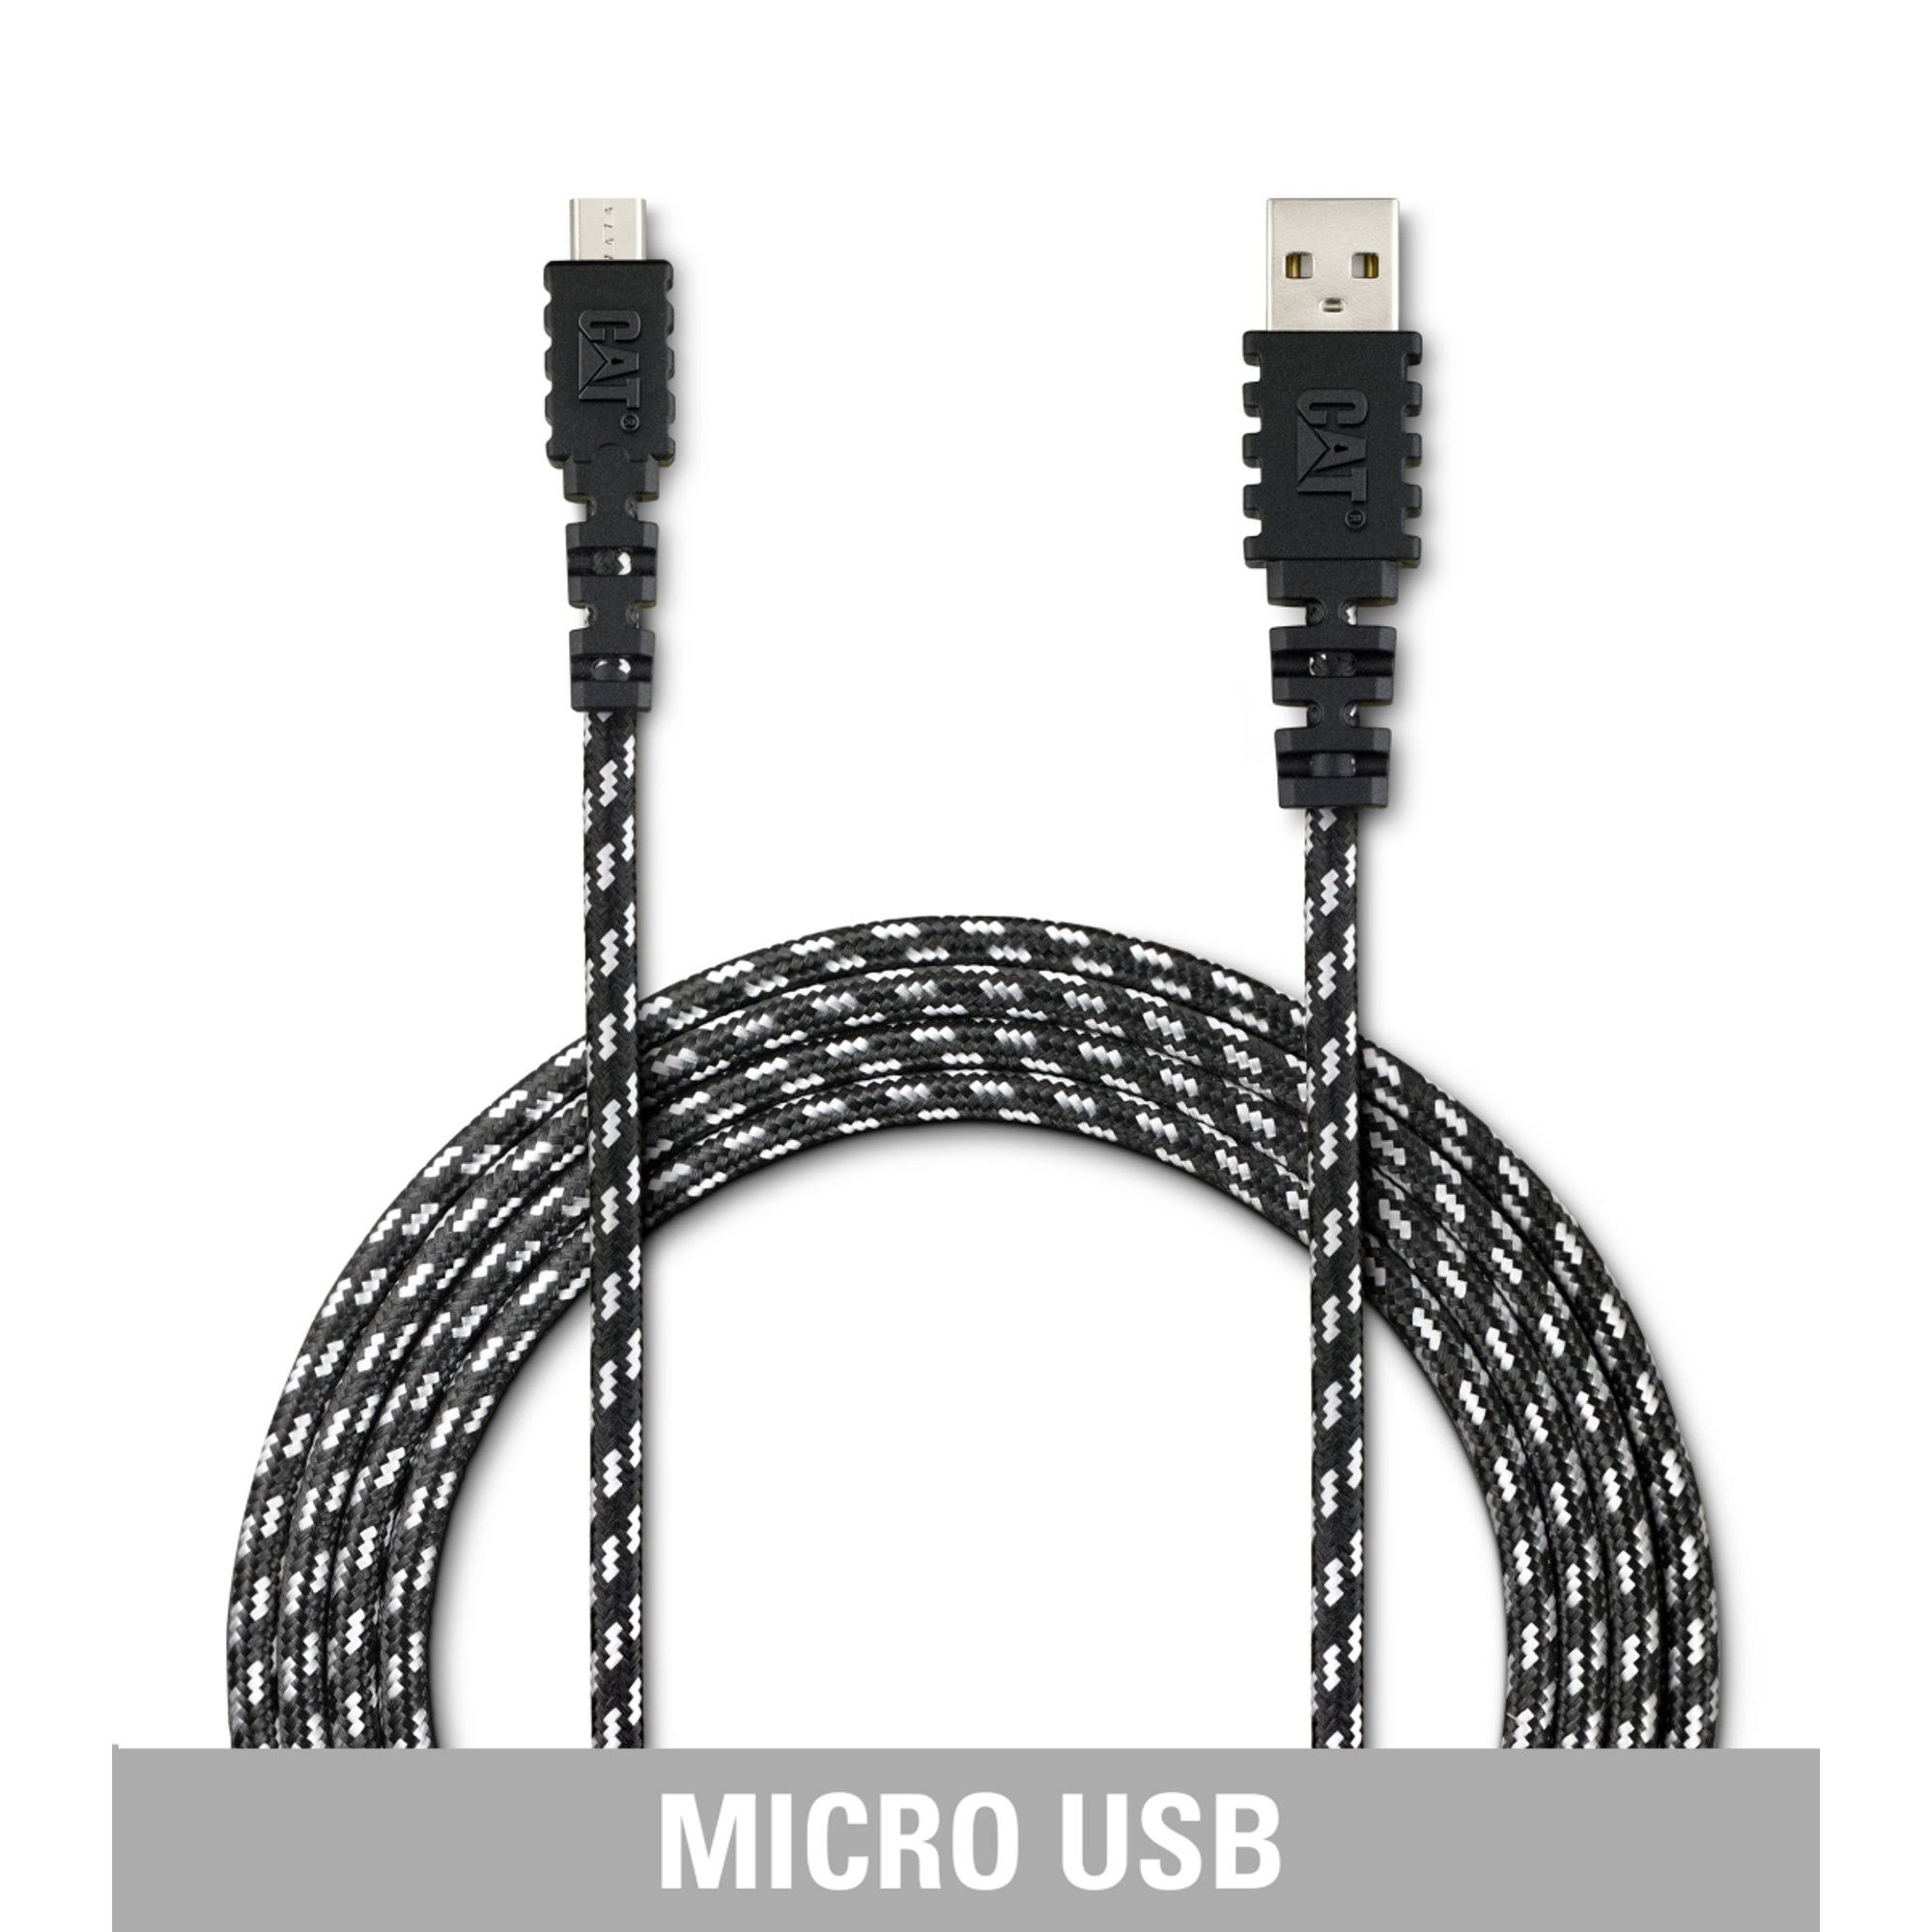 CAT Micro USB to USB Charge/Sync Cable - 10-Ft